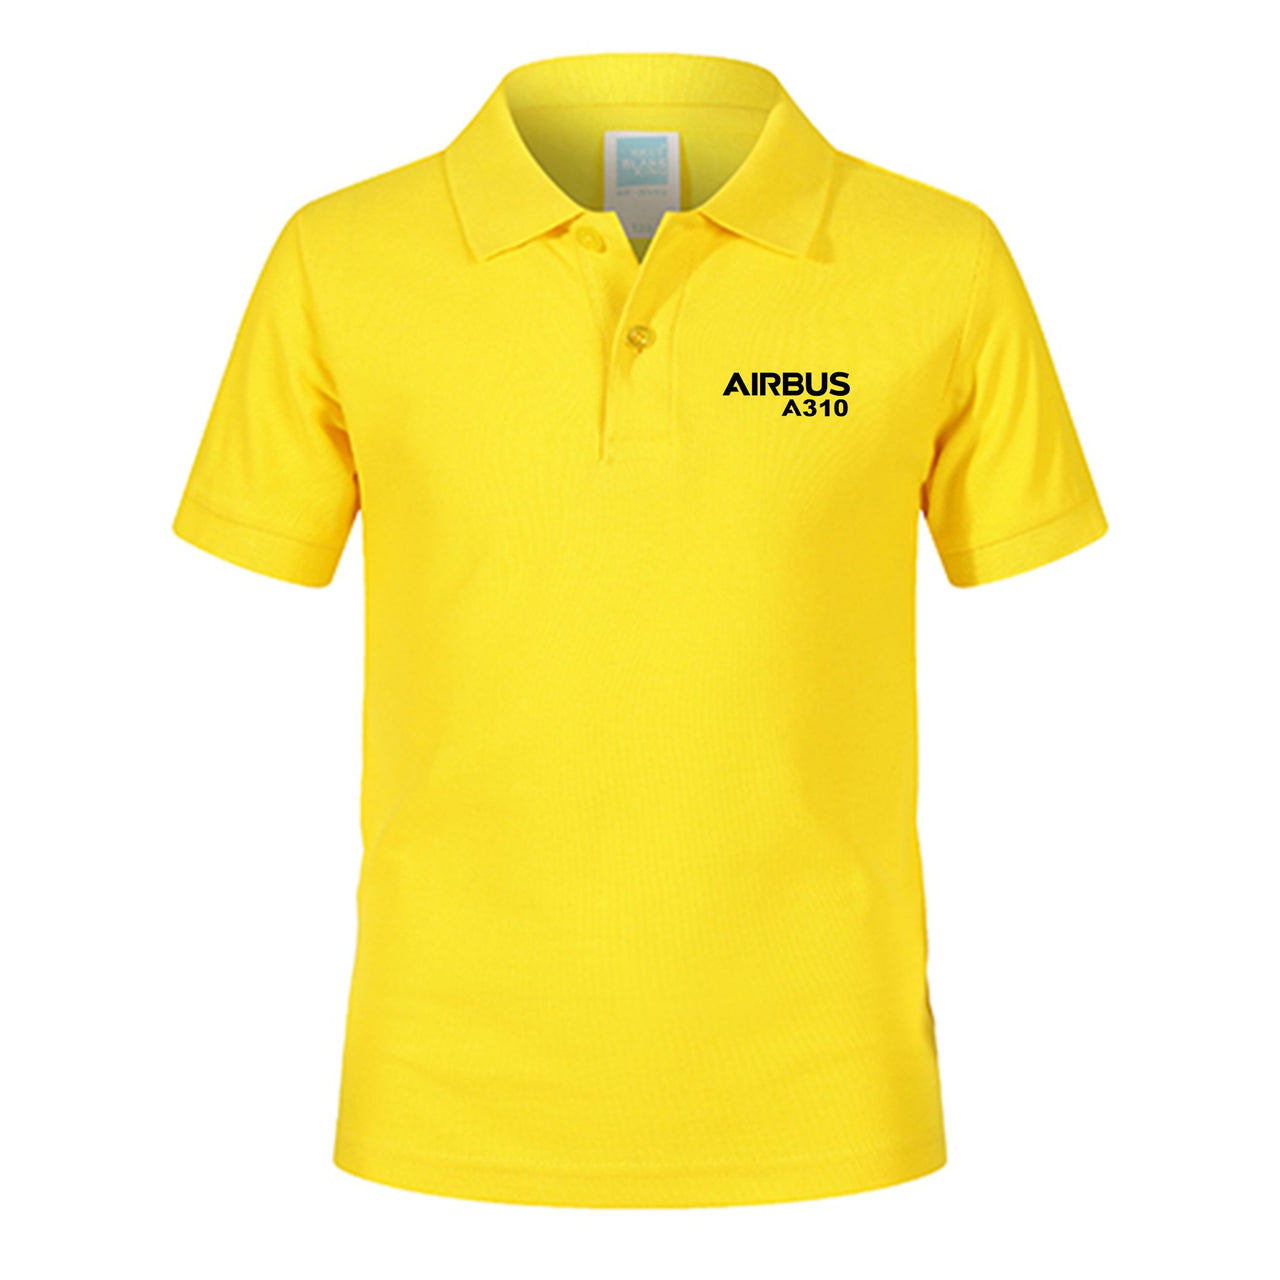 Airbus A310 & Text Designed Children Polo T-Shirts